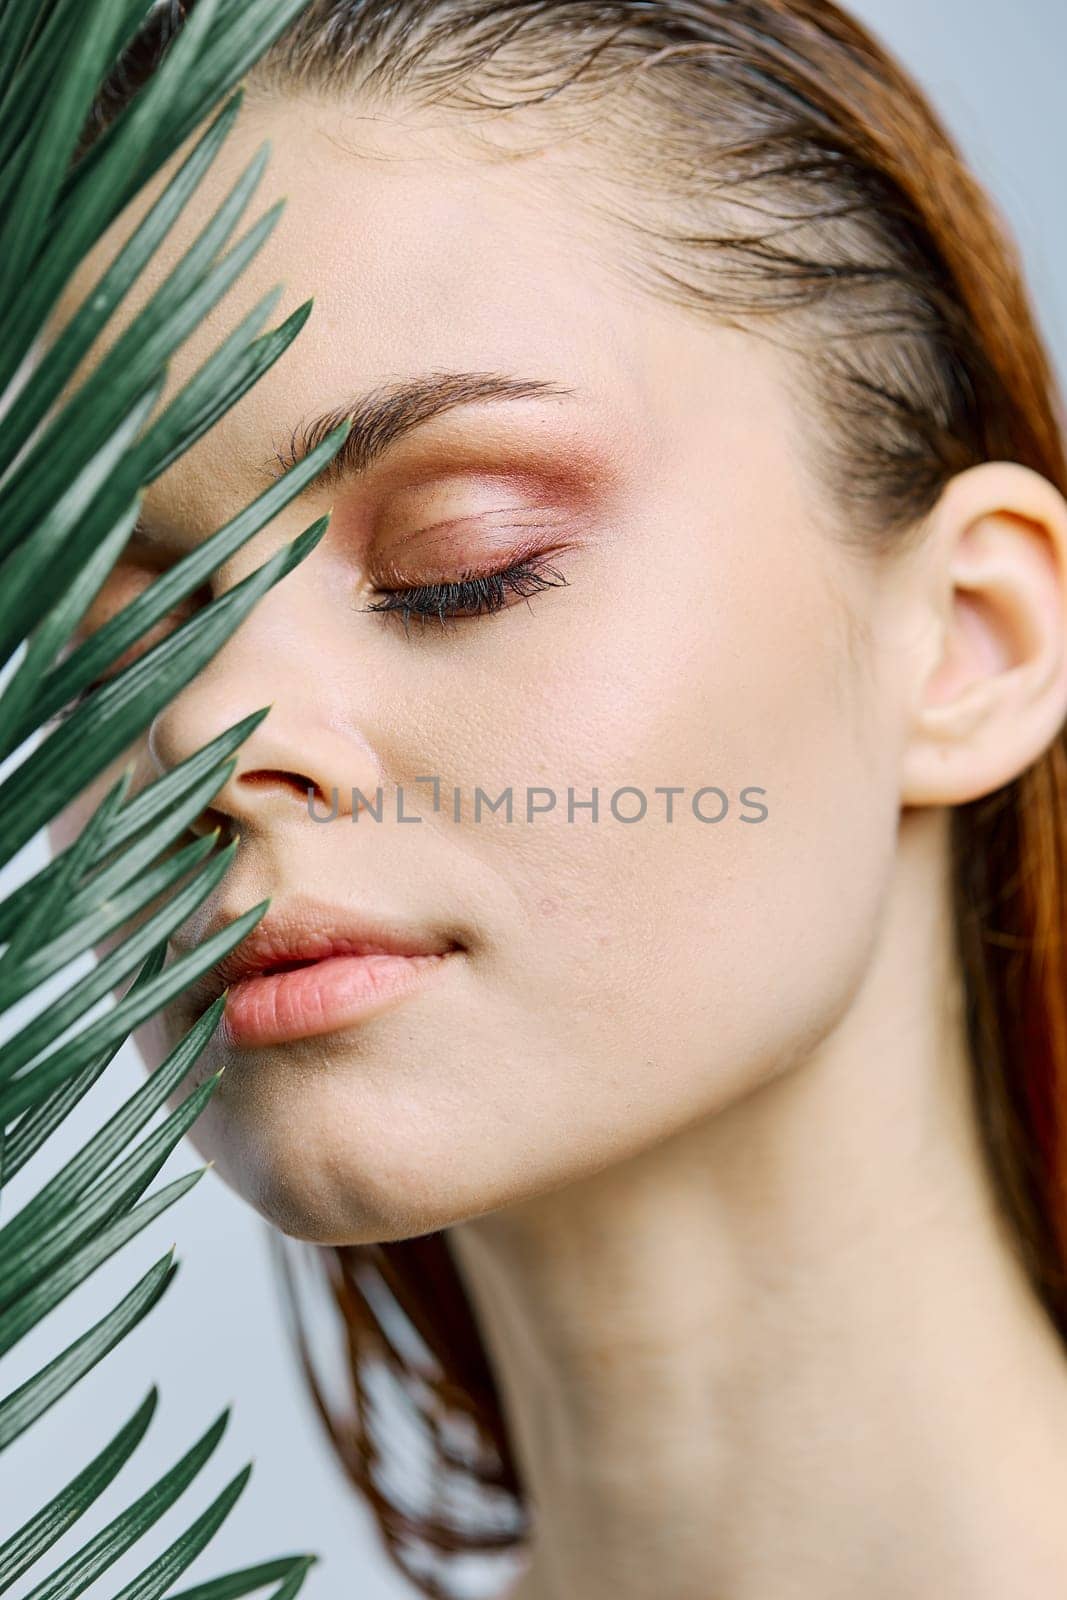 a close beauty portrait of a beautiful woman standing holding a palm leaf near her face, closing her eyes. Vertical photo without retouching of problem skin. High quality photo